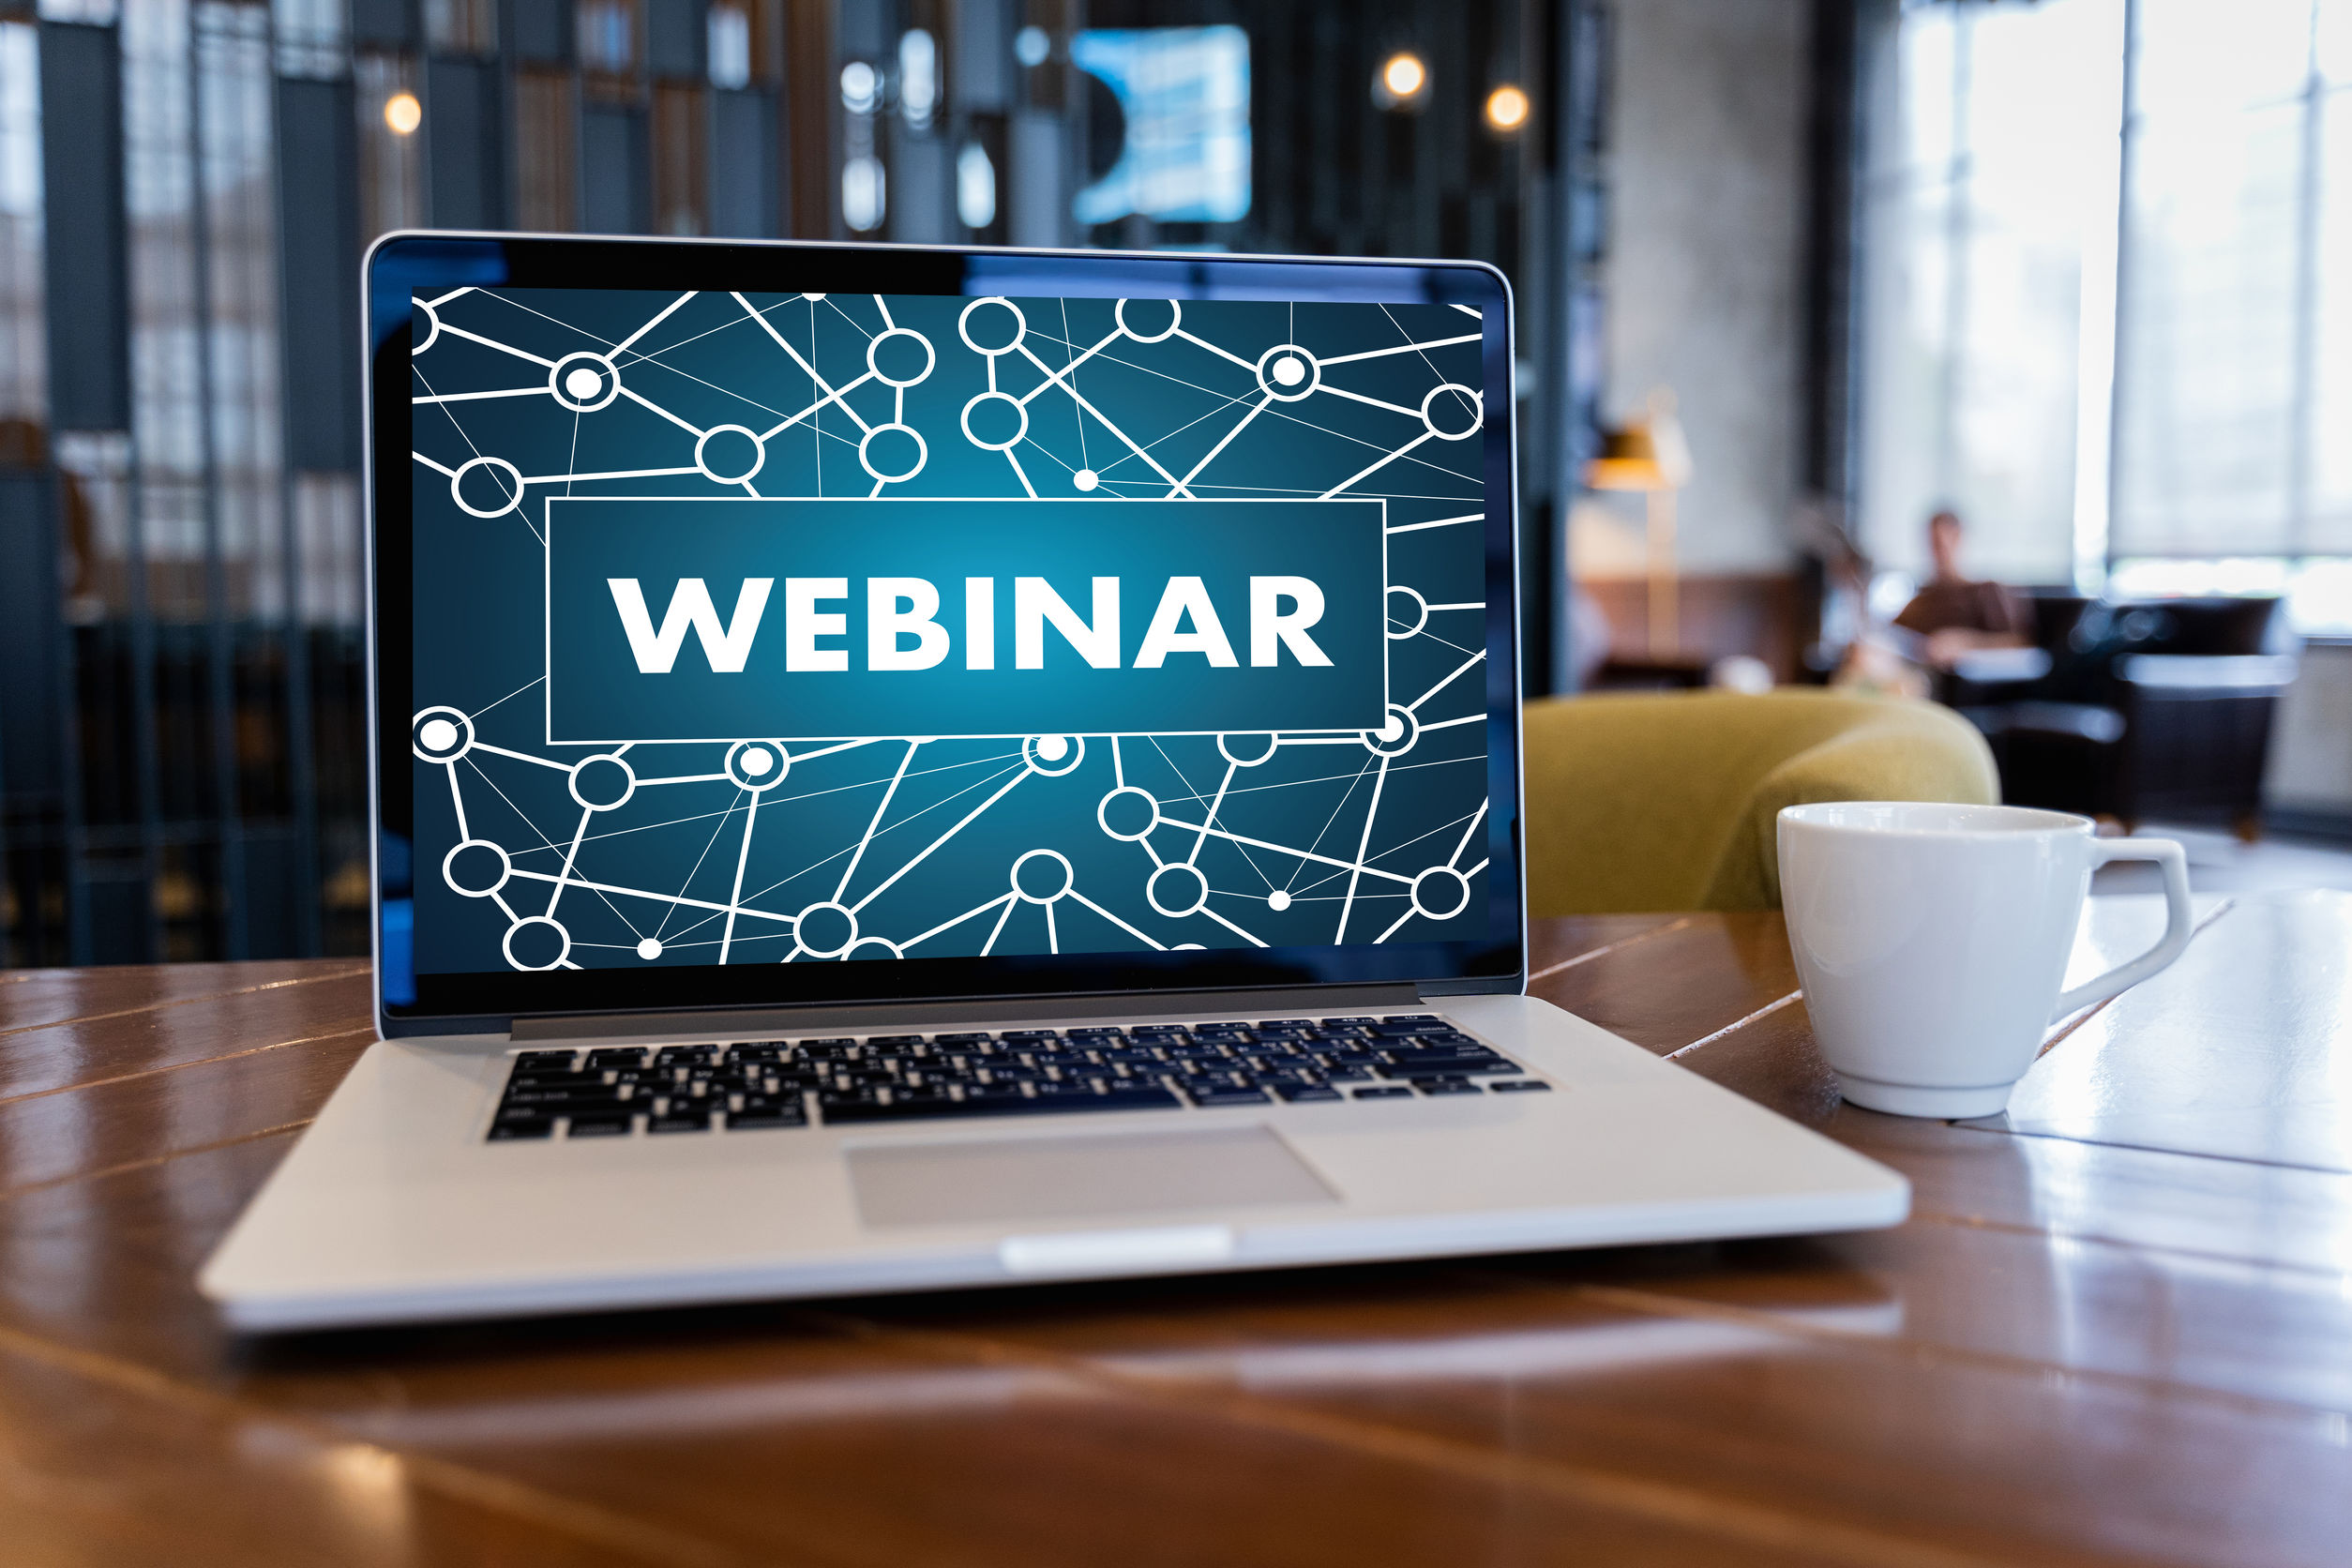 Increase Your Operational Efficiency with Our March Webinars